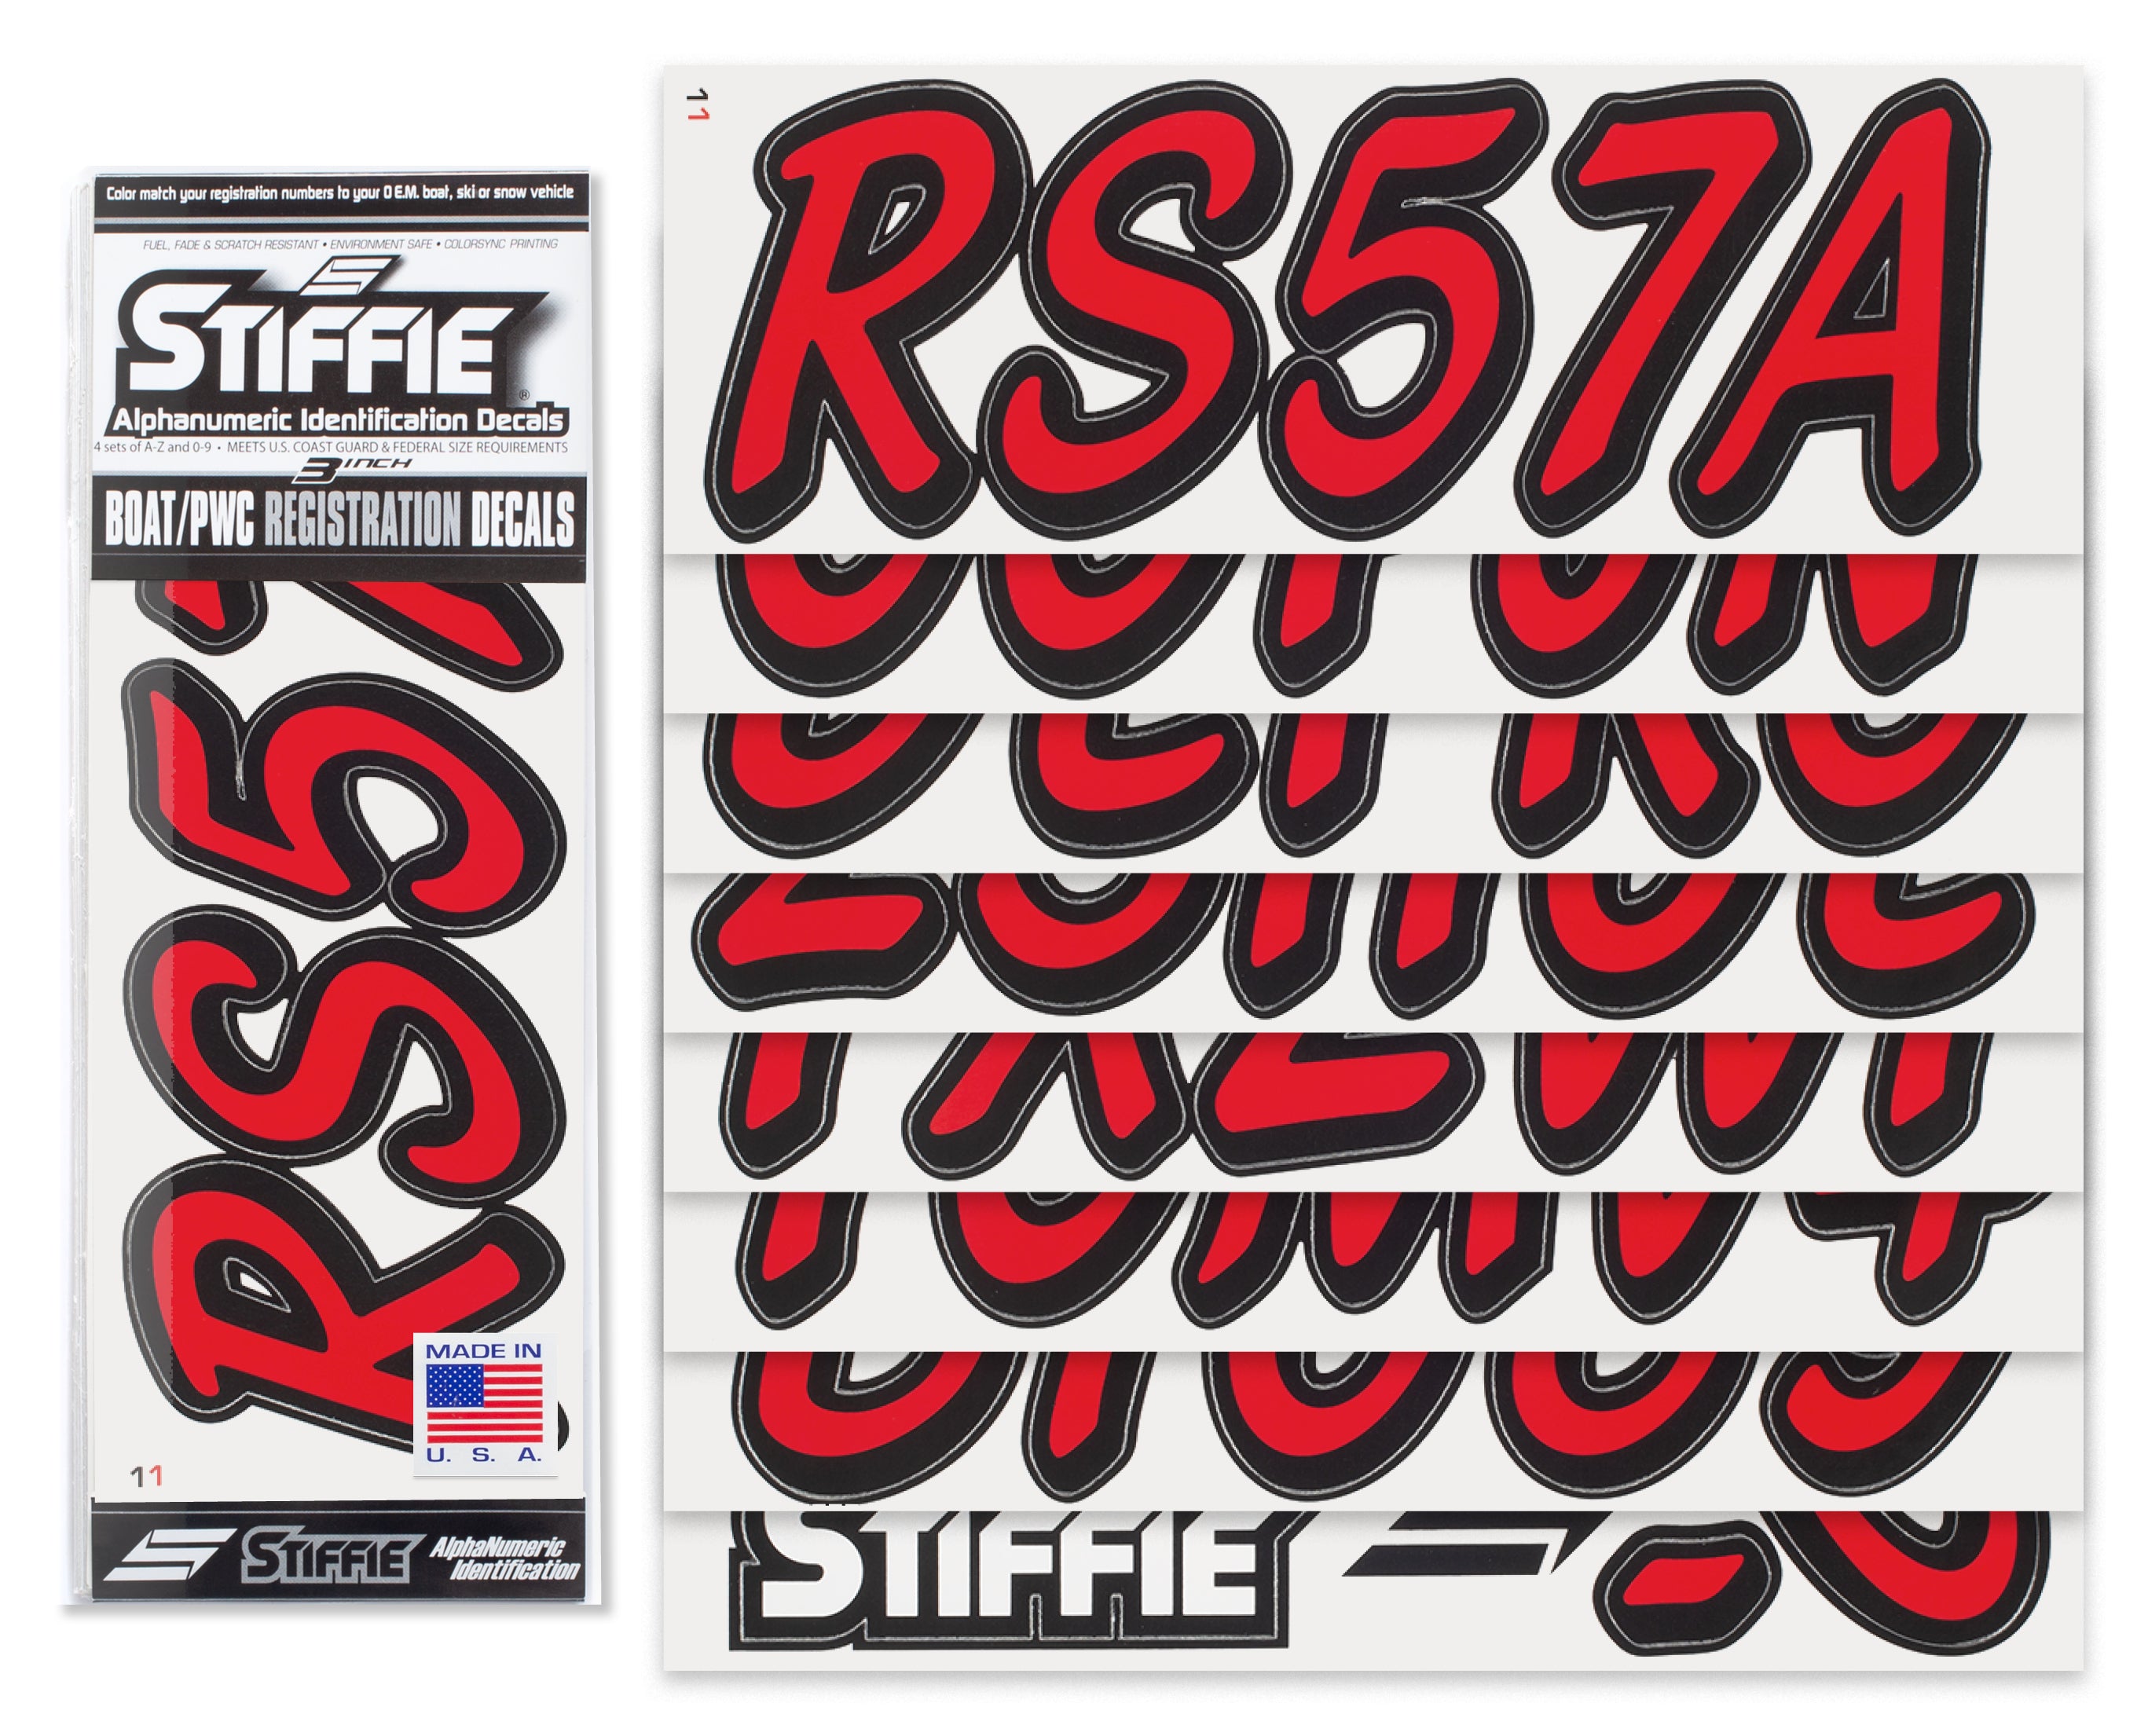 STIFFIE Whipline Solid Red/Black 3" Alpha-Numeric Registration Identification Numbers Stickers Decals for Boats & Personal Watercraft